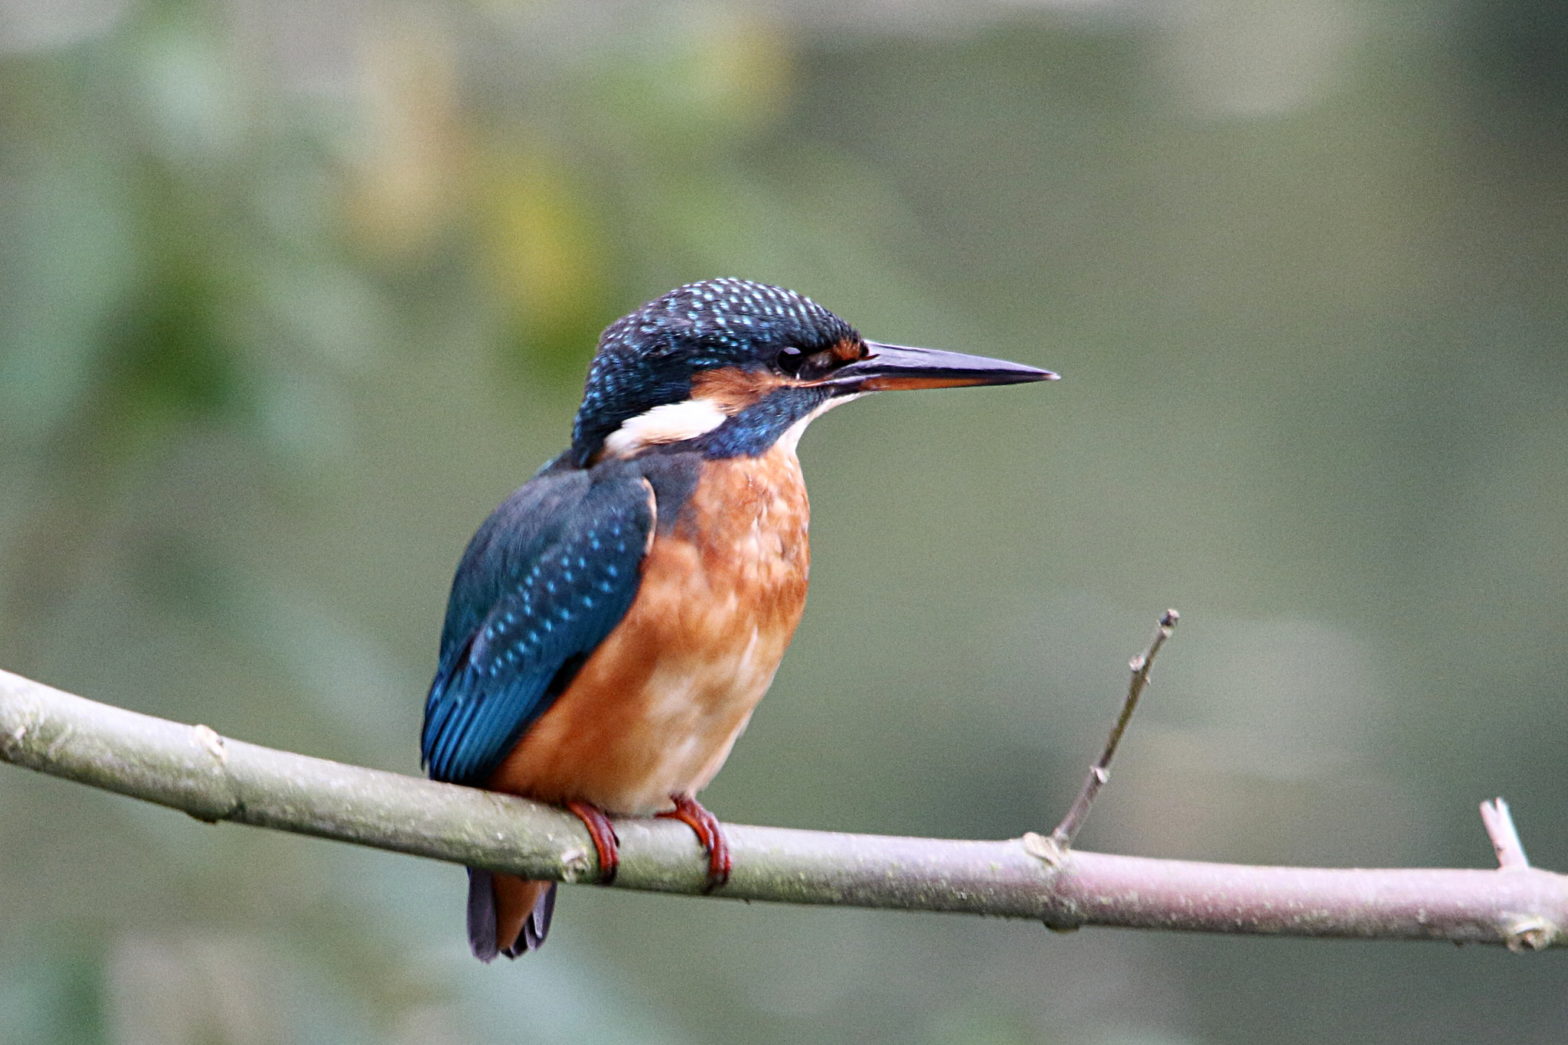 Concentrating on “Wow!” gives me a blurry Kingfisher?